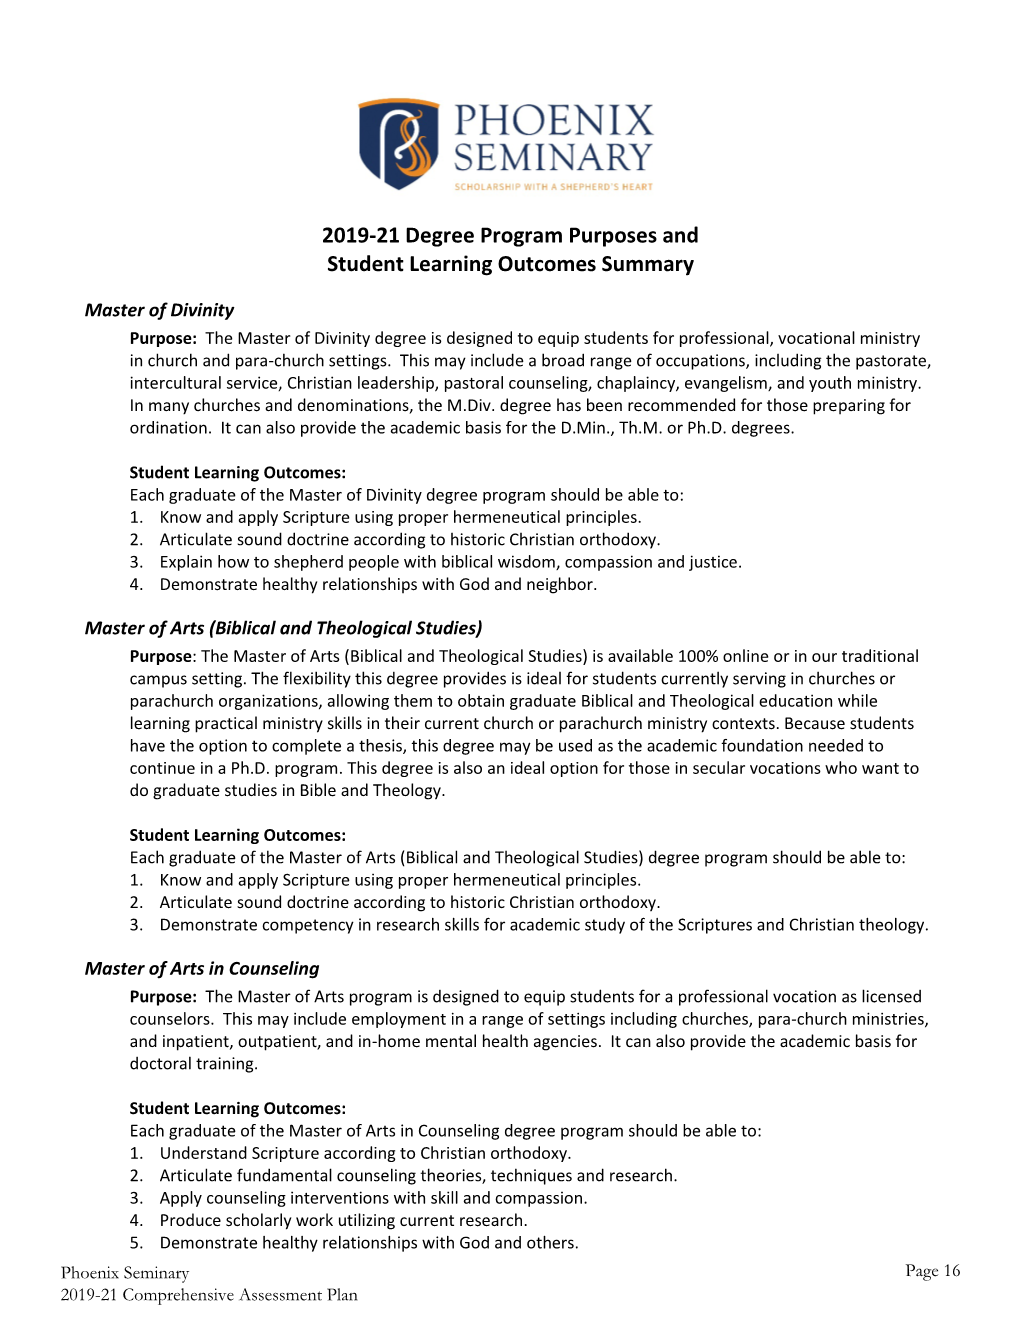 2019-21 Degree Program Purposes and Student Learning Outcomes Summary